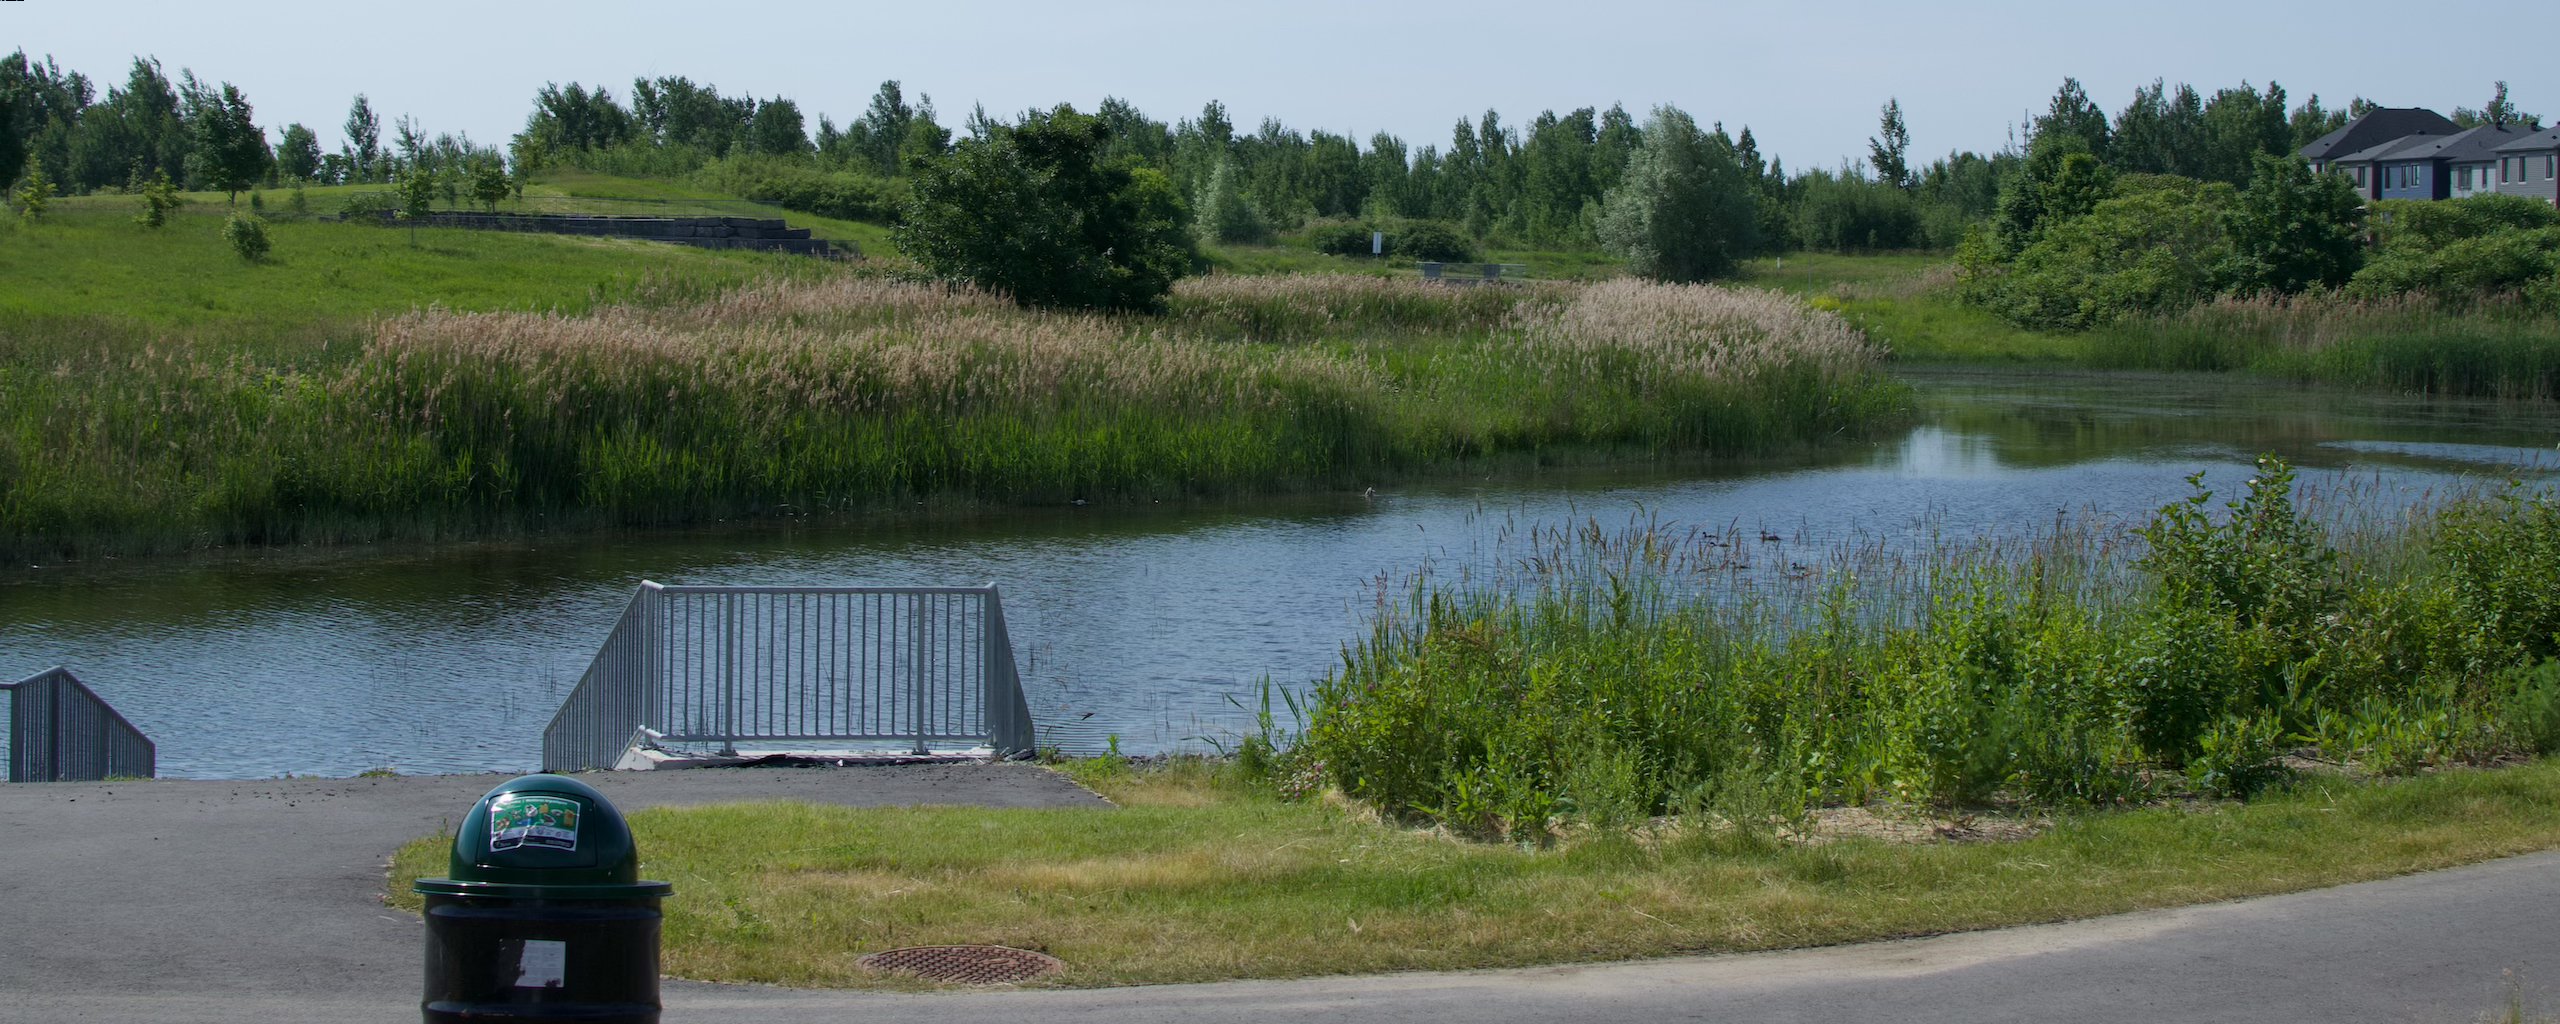 An image of Greenery next to a retaining pond, with a path and a trashcan. The sky is reflecting off of the water.